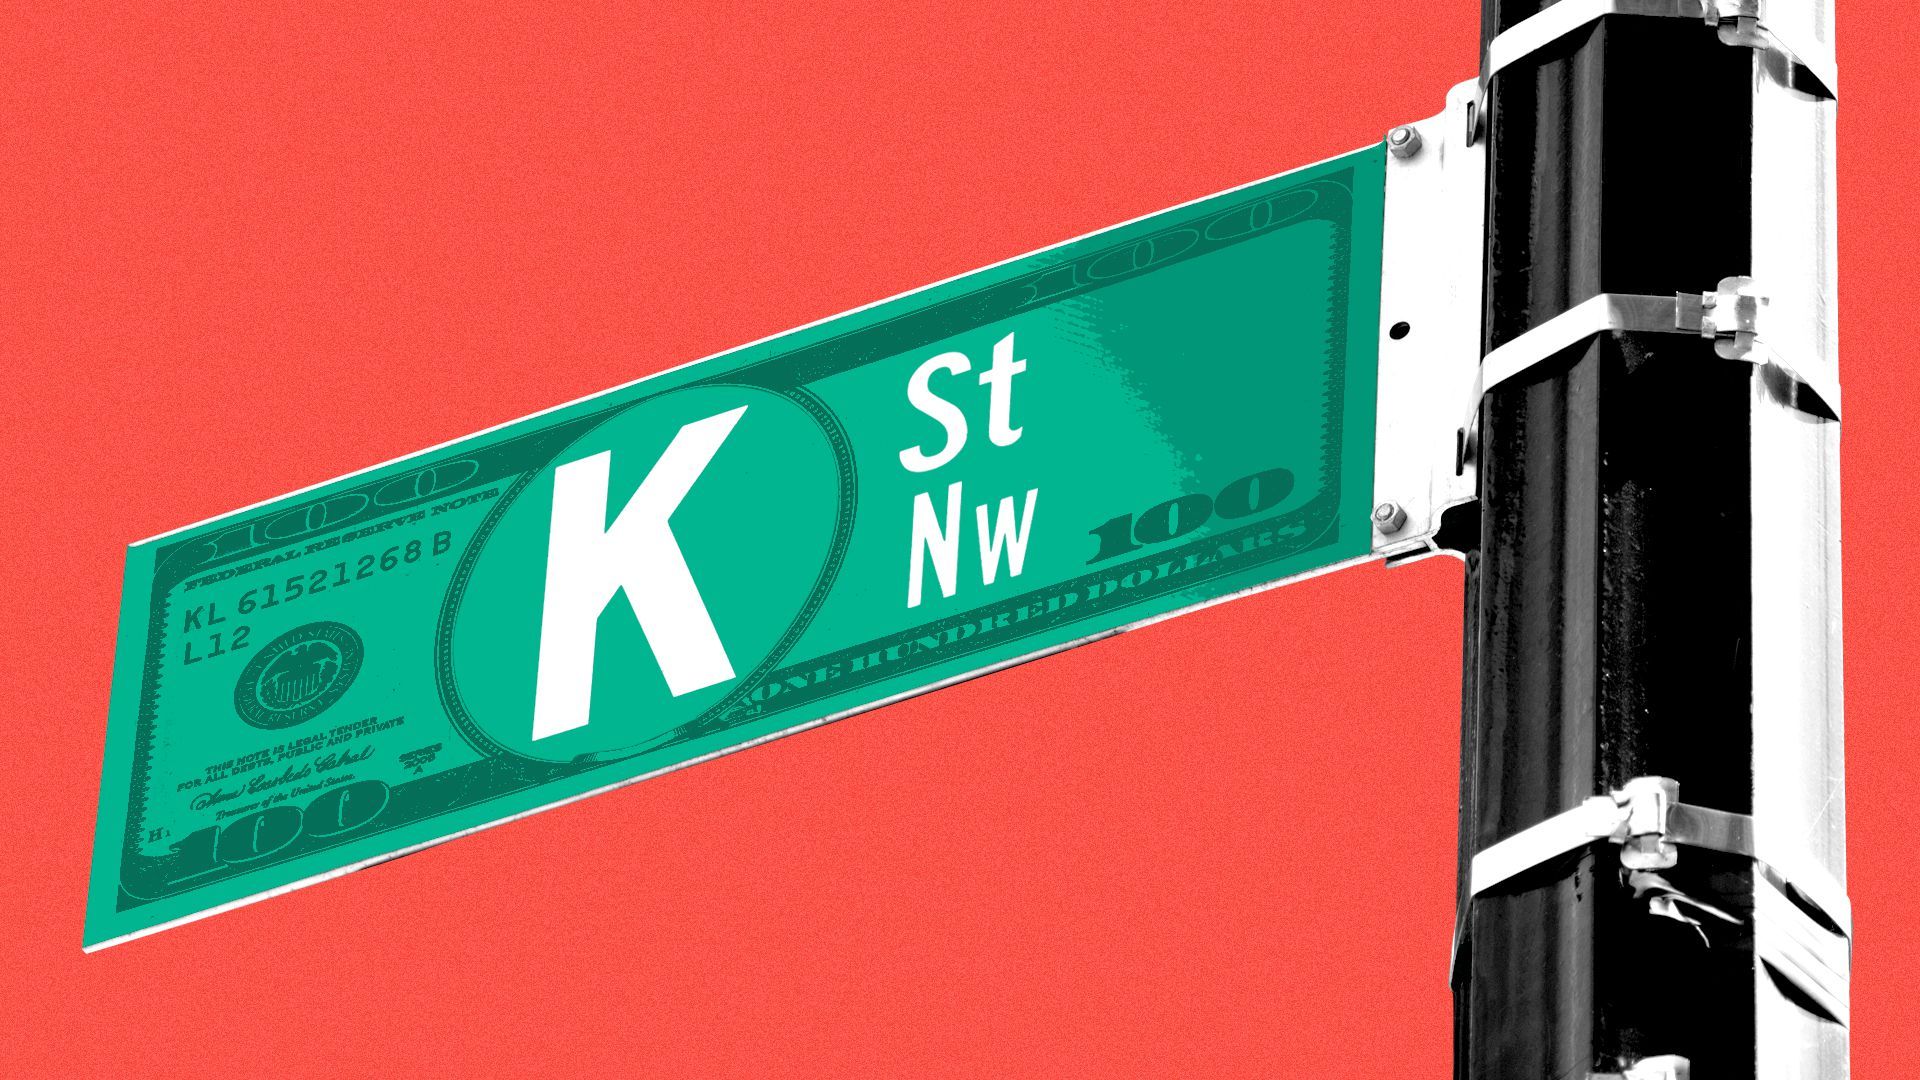 Illustration of a K Street sign with details from a hundred-dollar bill added to it.